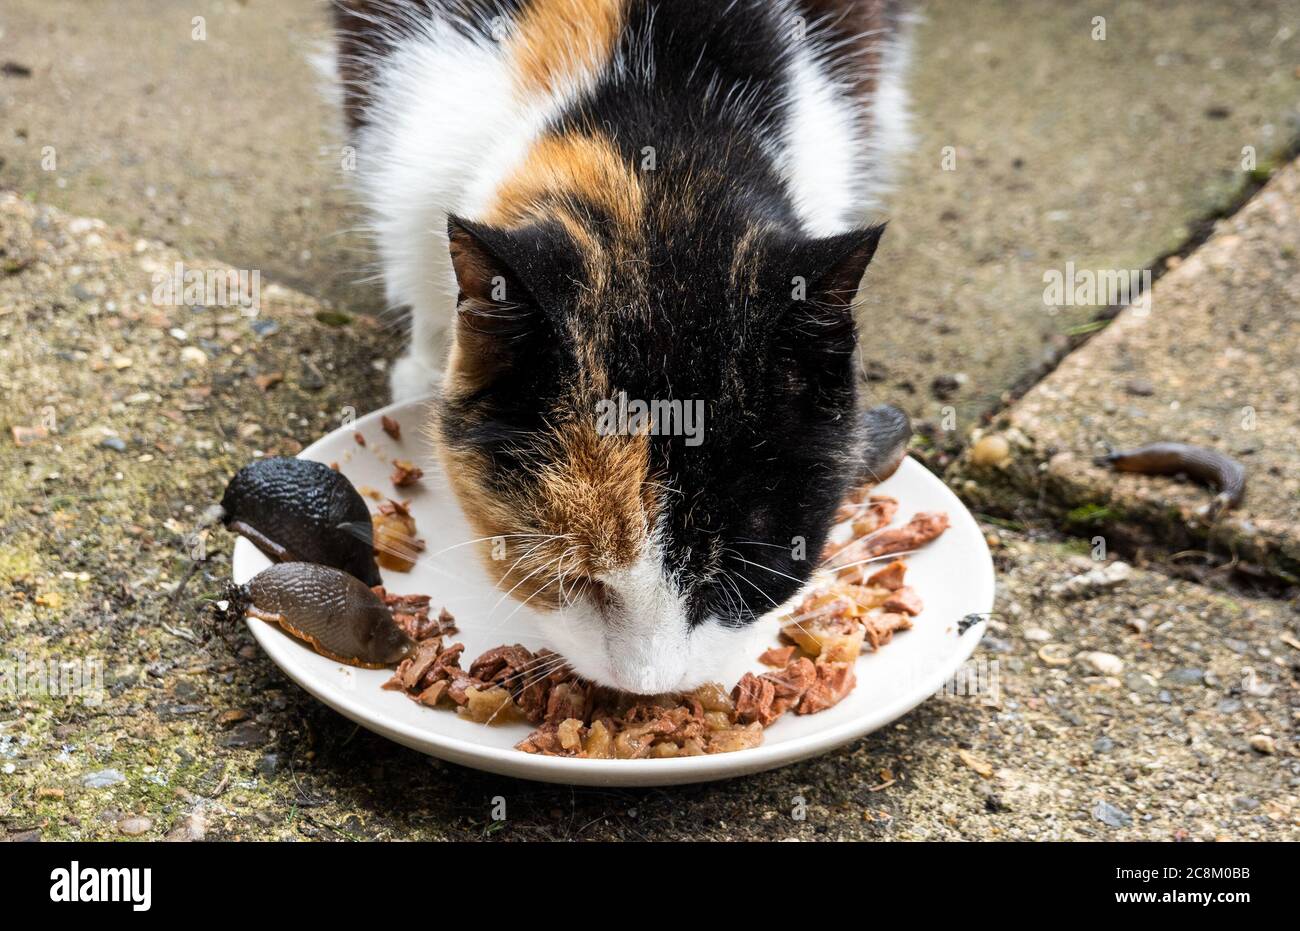 A tortoiseshell domestic cat eating cat food along side slugs on a plate. Pet owners should be very careful when feeding pets outside, as slugs and snails are attracted to pet food. The slugs and snails often suffer from angiostrongylosis, a condition caused by the nematode parasite Angiostrongylus cantonensis, also known as the rat lungworm. This can cause serious diseases in pets, wildlife and humans. Credit: Stephen Bell/Alamy Stock Photo